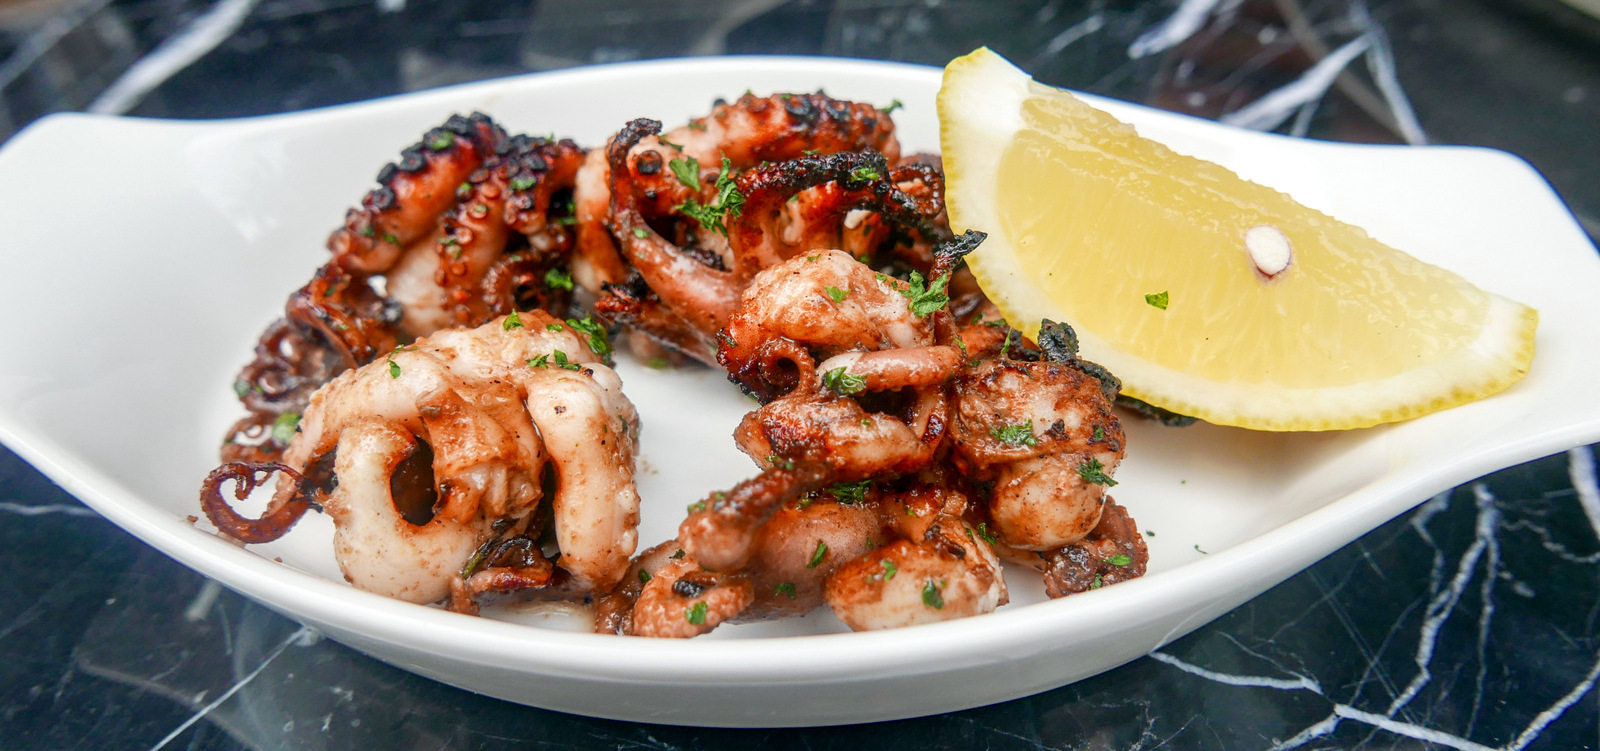 7. Supperclub - grilled baby octopus